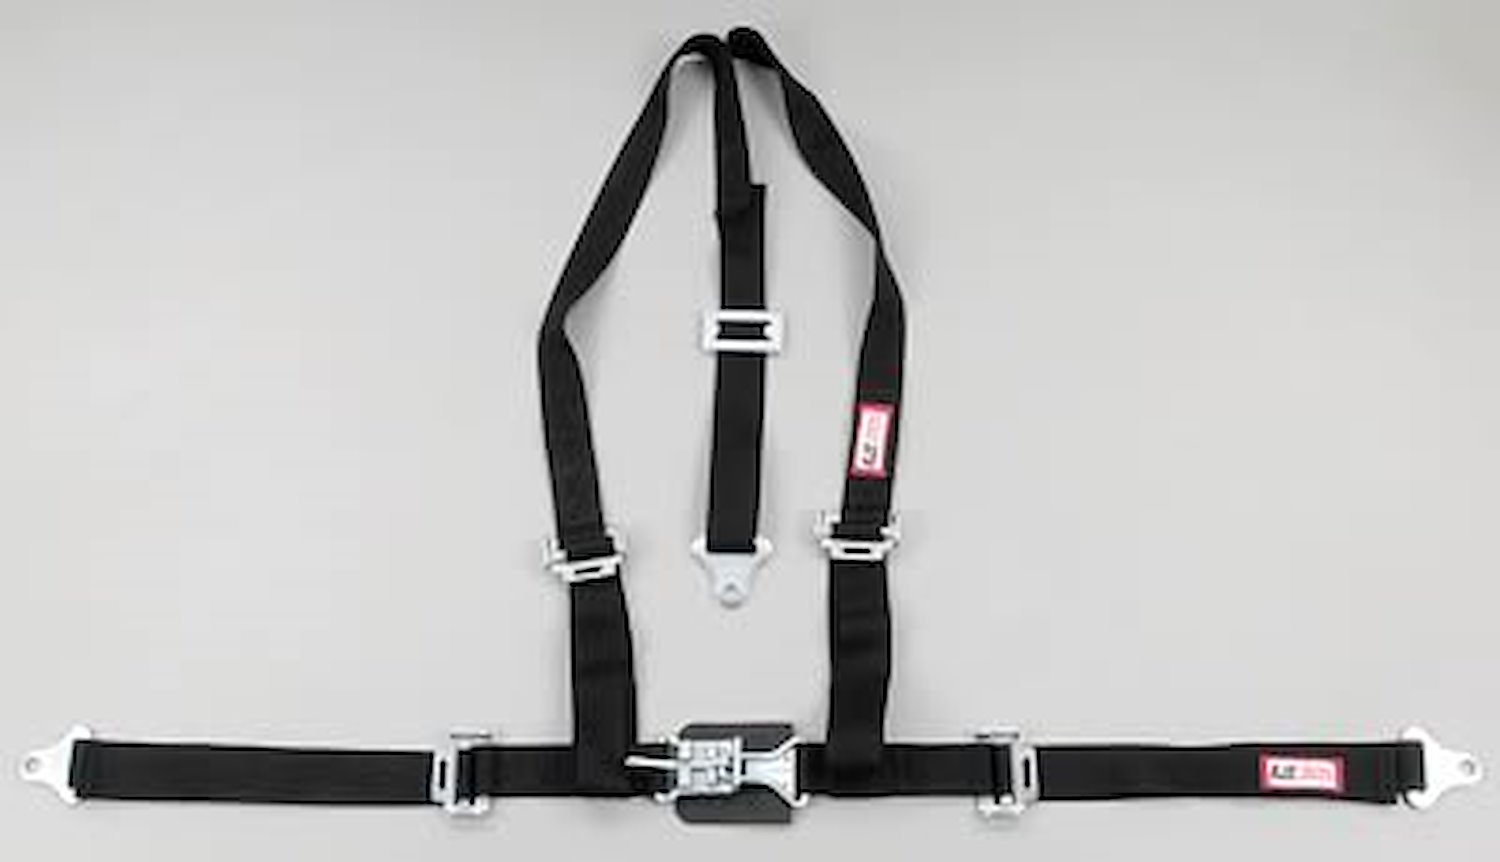 NON-SFI L&L HARNESS 3 PULL UP Lap Belt SNAP SEWN IN 2 S.H. Individual FLOOR Mount w/STERNUM STRAP WRAP/SNAP PURPLE